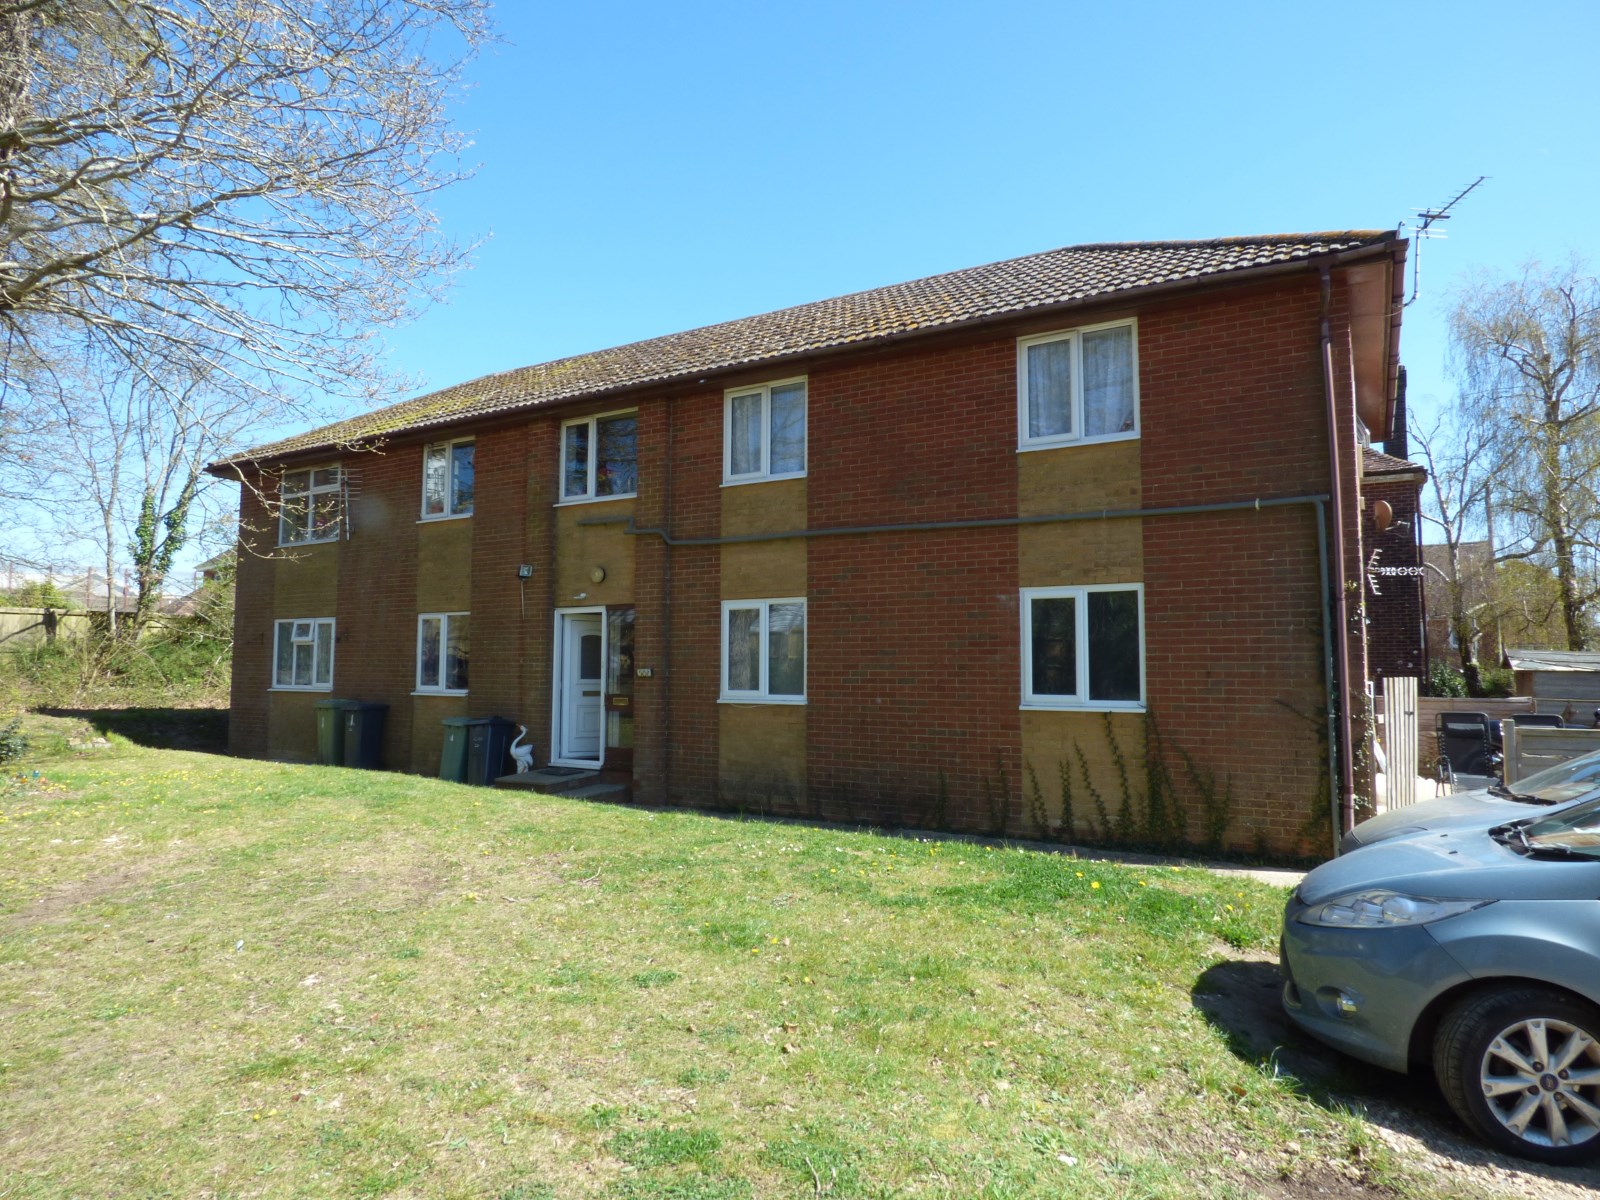 Norman Court, Quarry View, Newport, Isle Of Wight, PO30